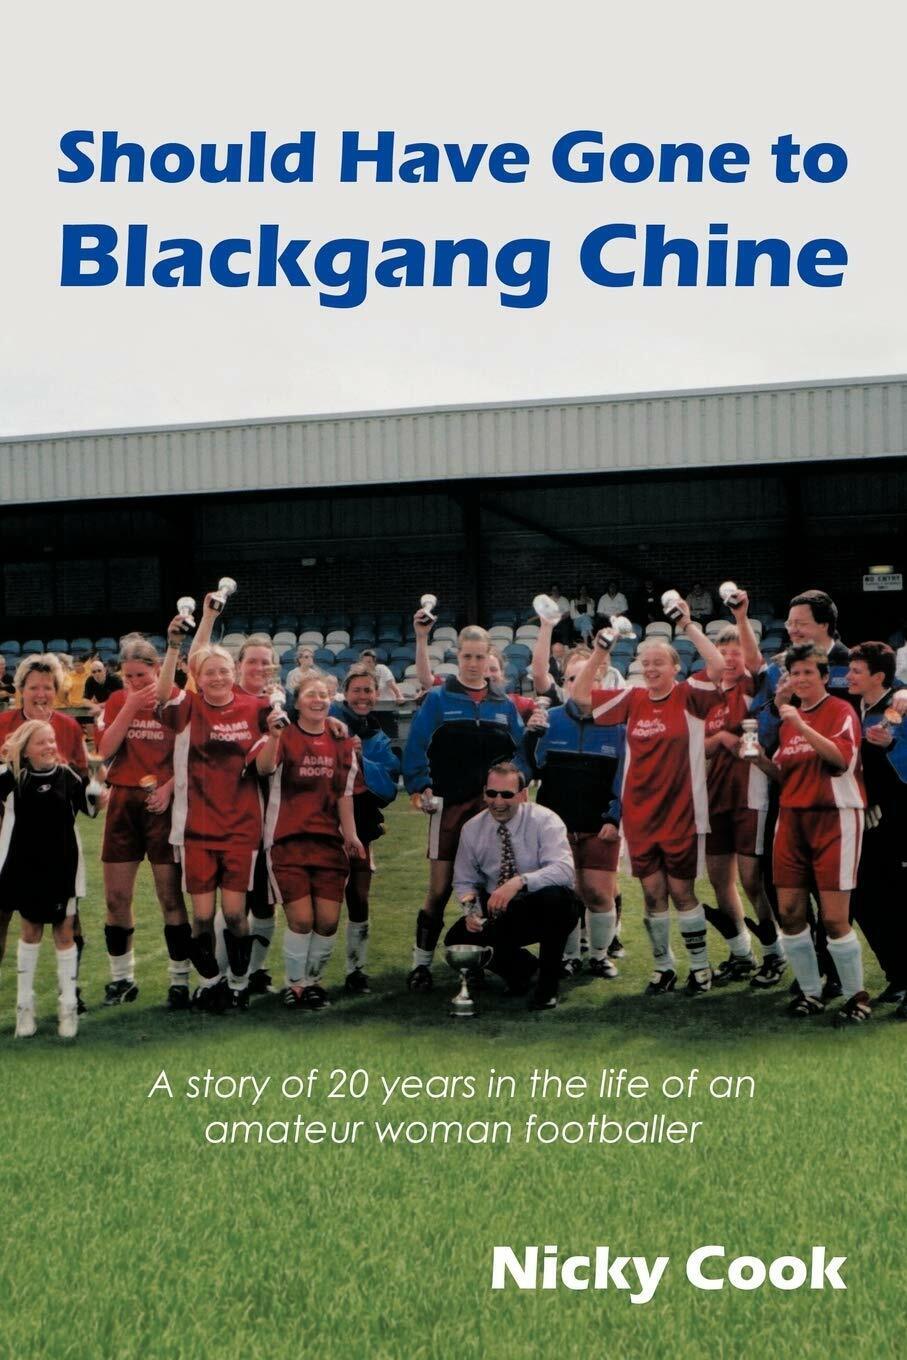 Should Have Gone to Blackgang Chine - Nicky Cook - AUTHORHOUSE, 2009 libro usato